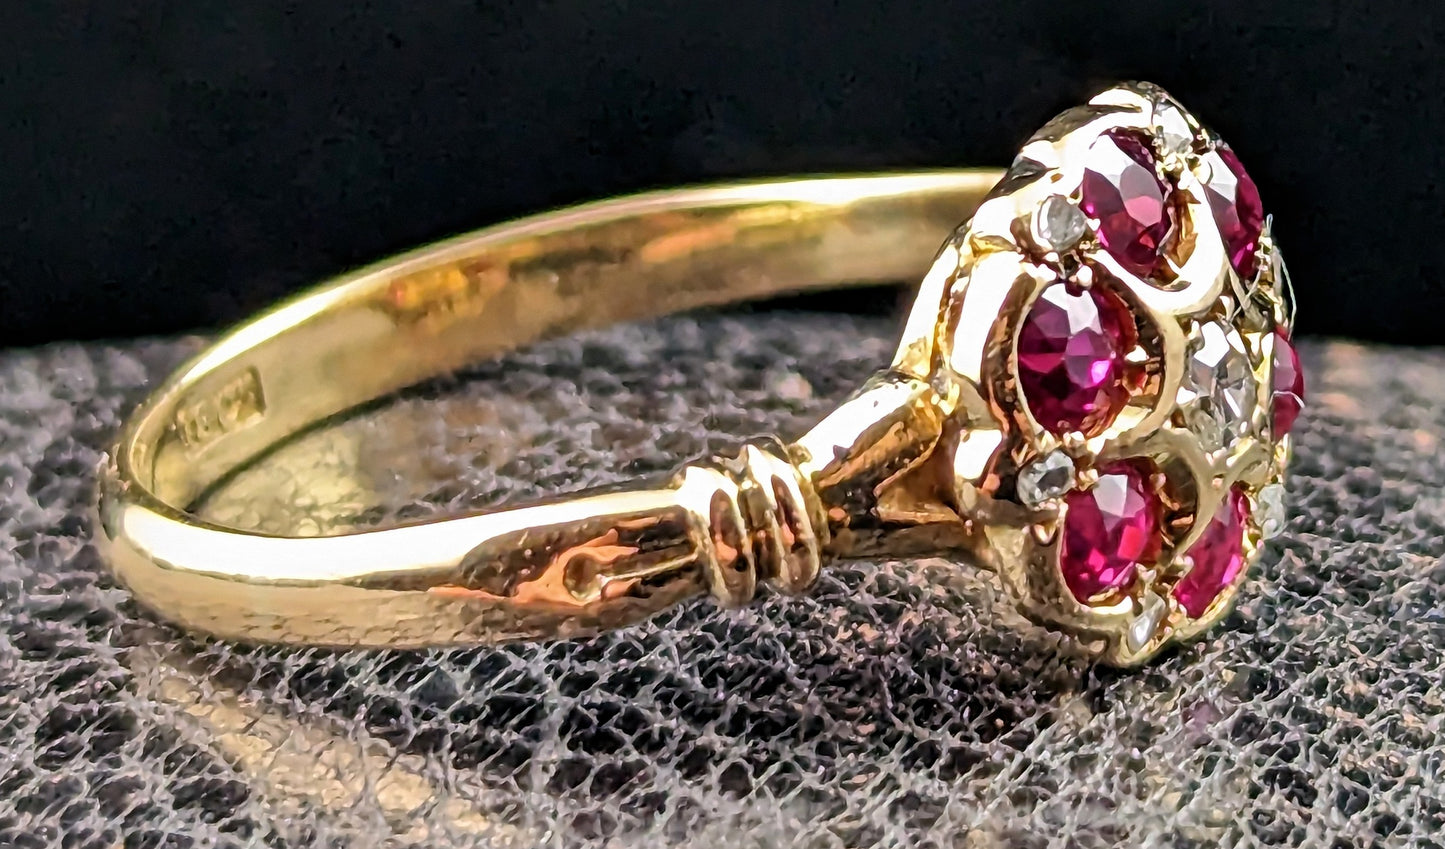 Antique Ruby and Diamond cluster ring, 18ct gold, Art Deco